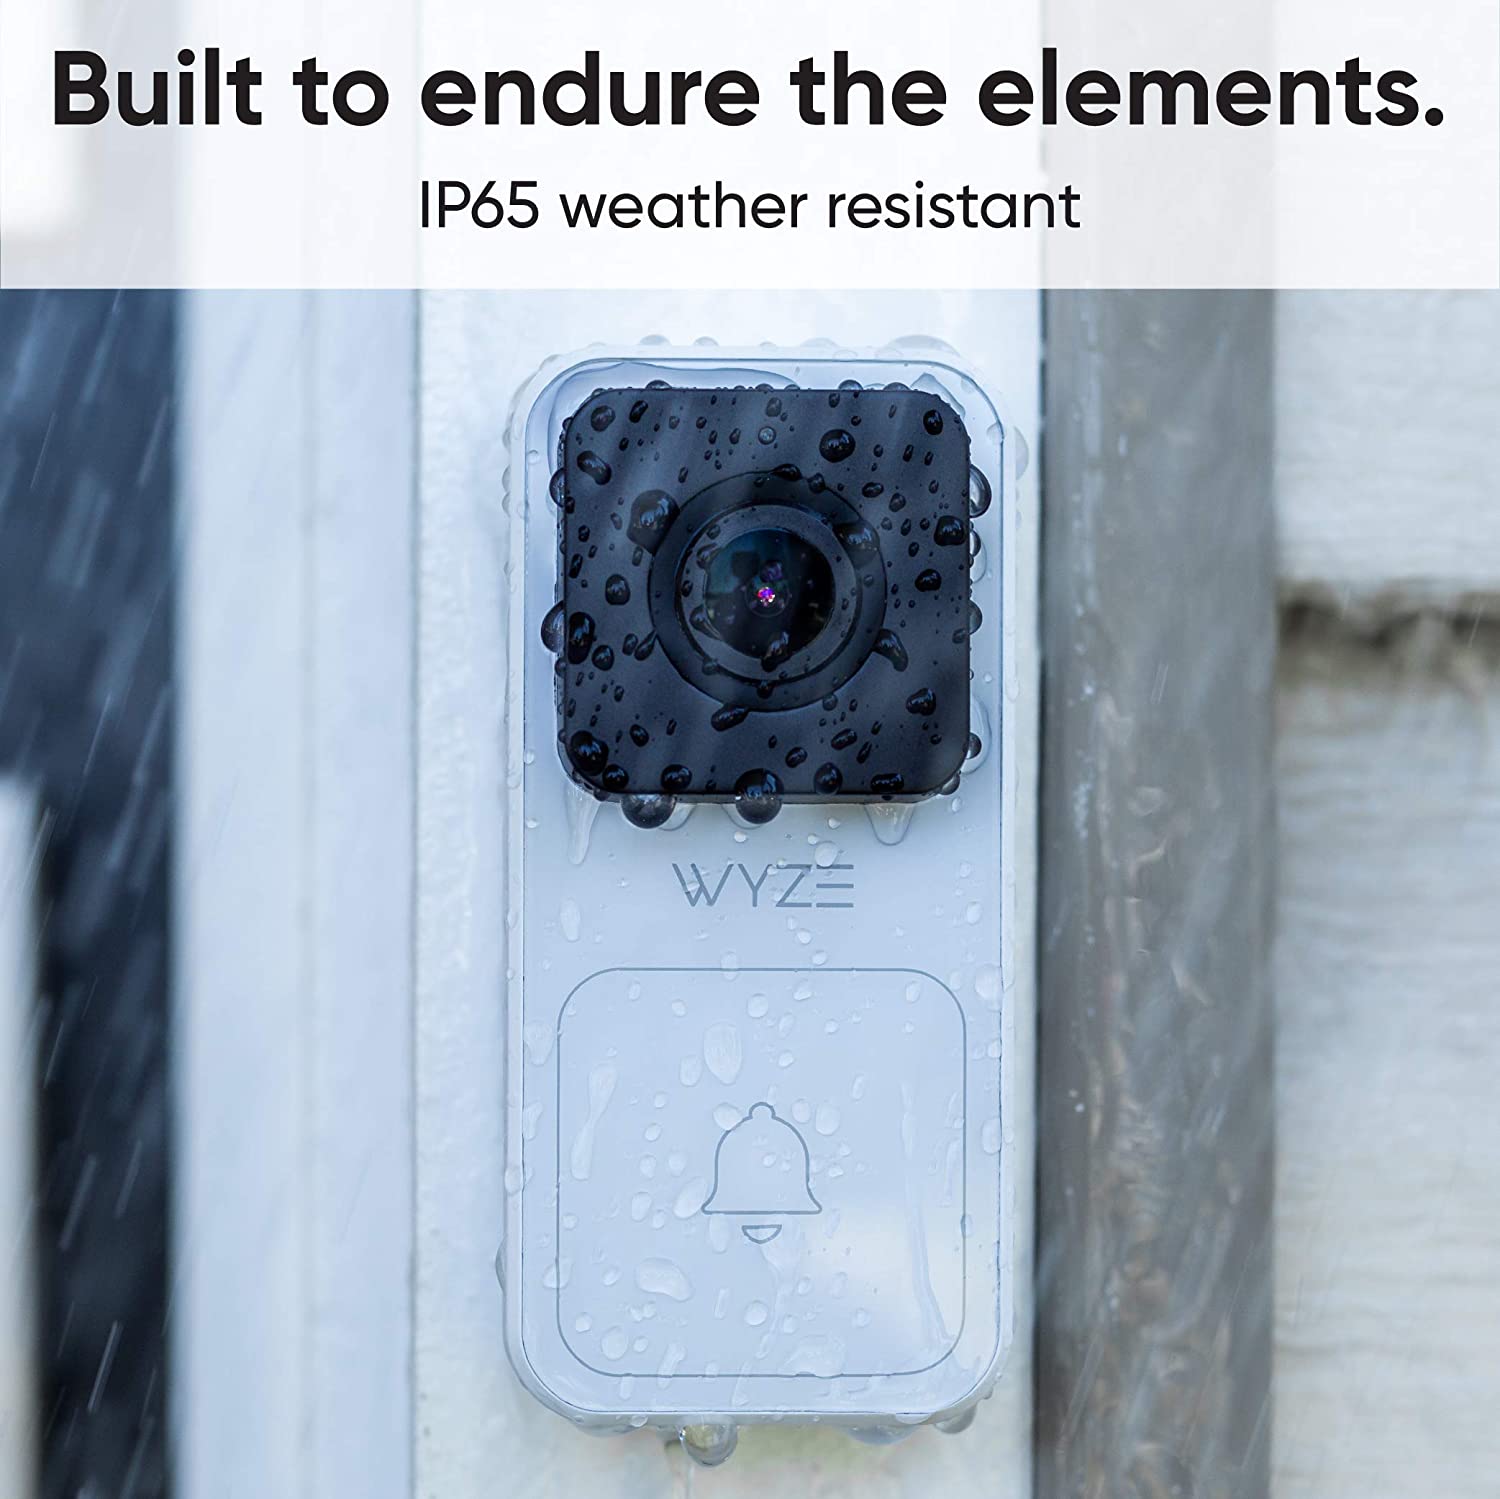 Wyze 1080p Wired Video Doorbell with 2-Way Audio and Night Vision - Pro-Distributing